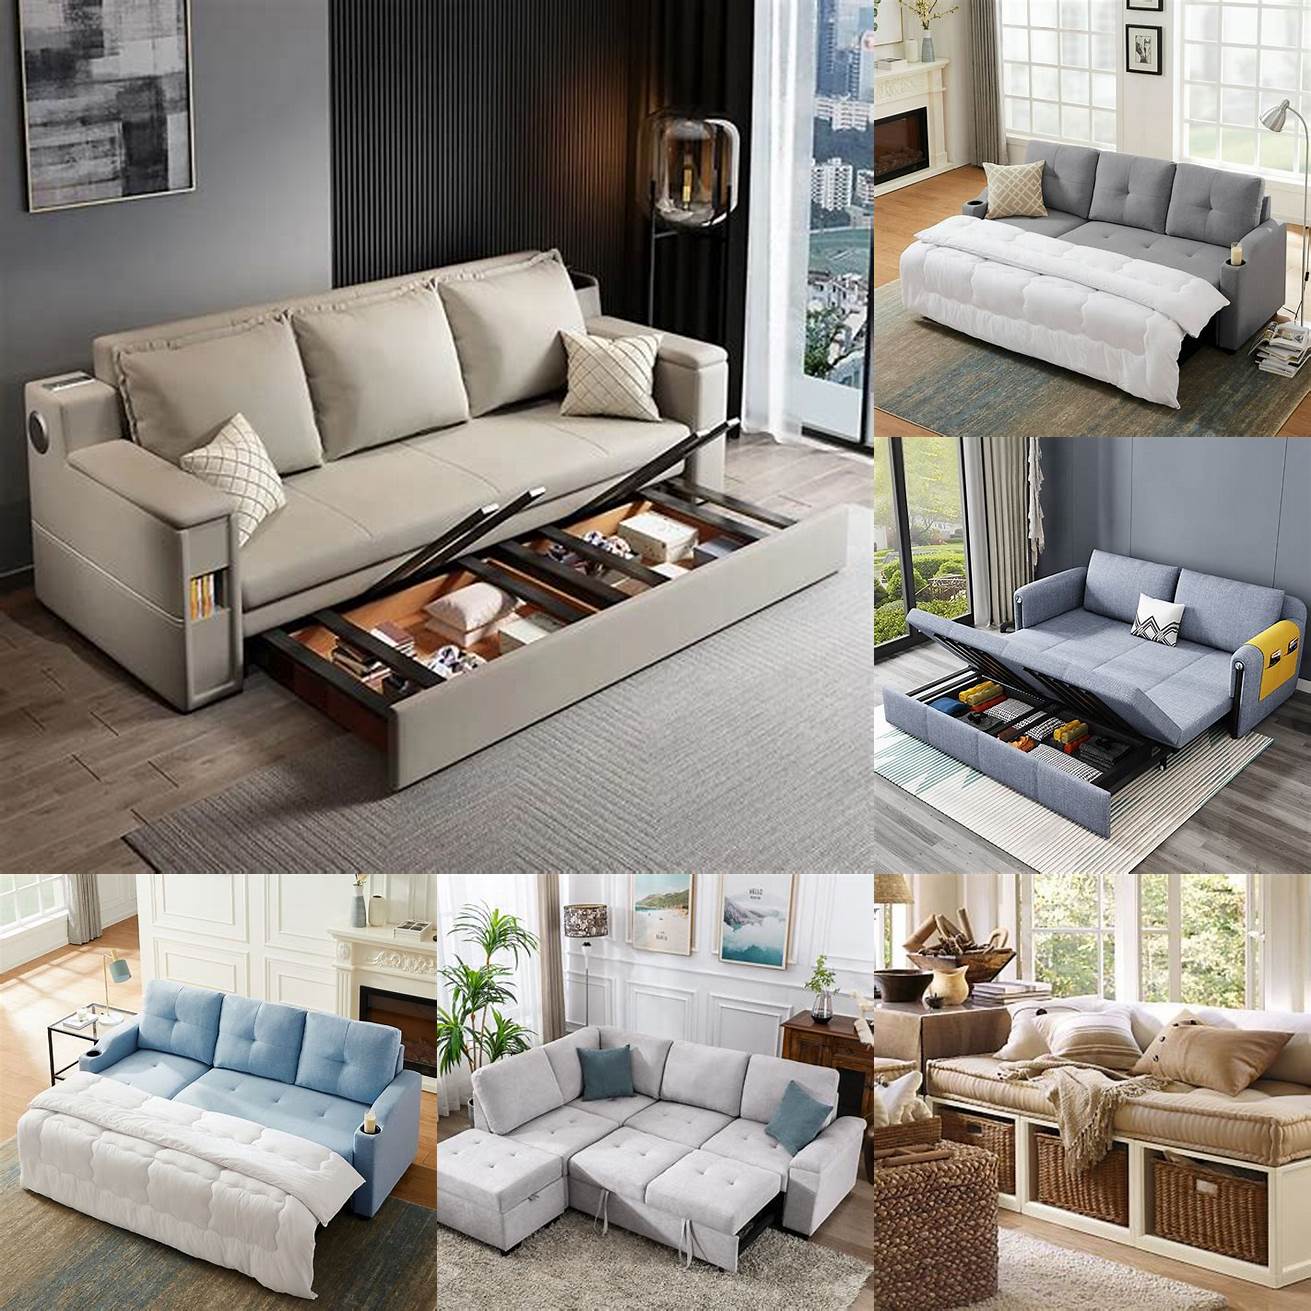 Sofa bed with built-in storage